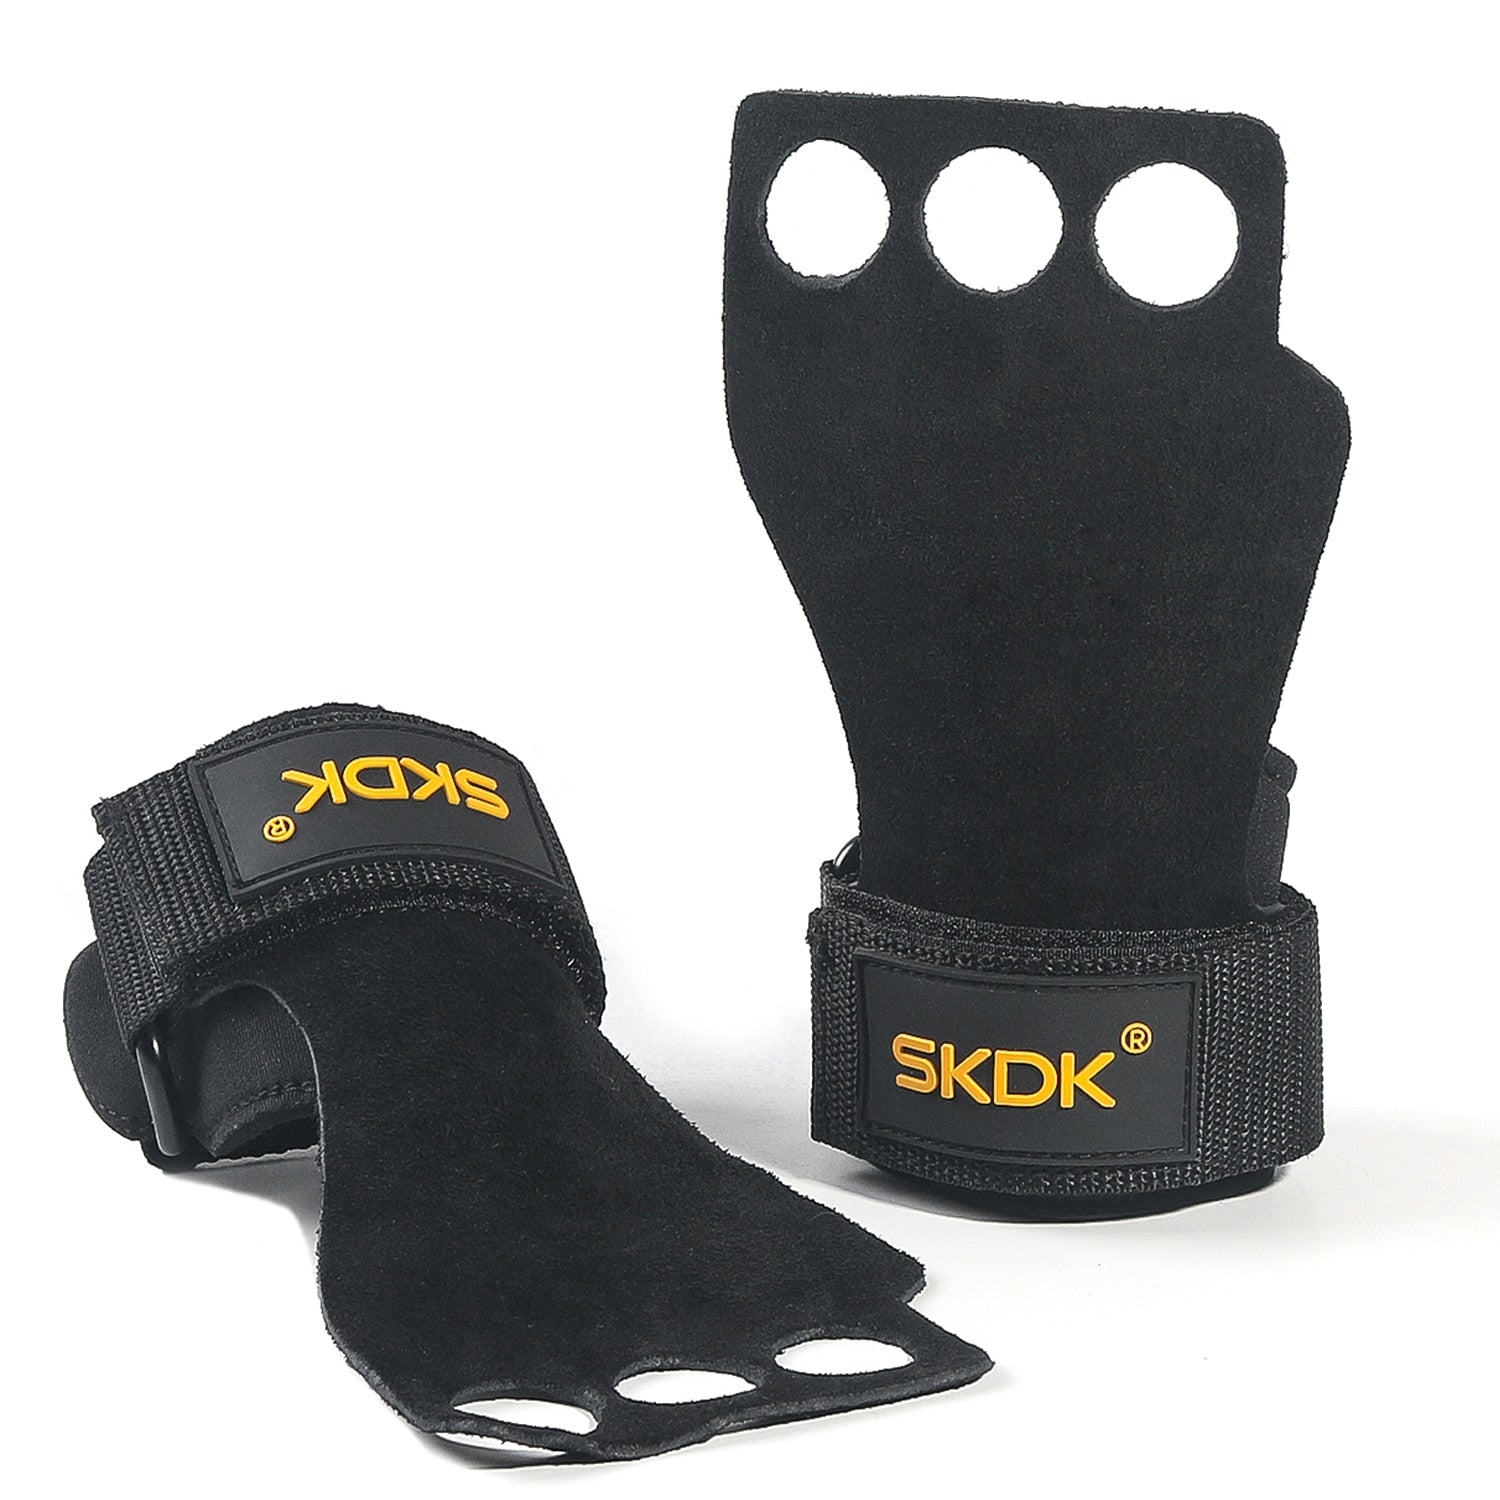 Crossfit Grips Fitness Gloves & Hand Palm Protector